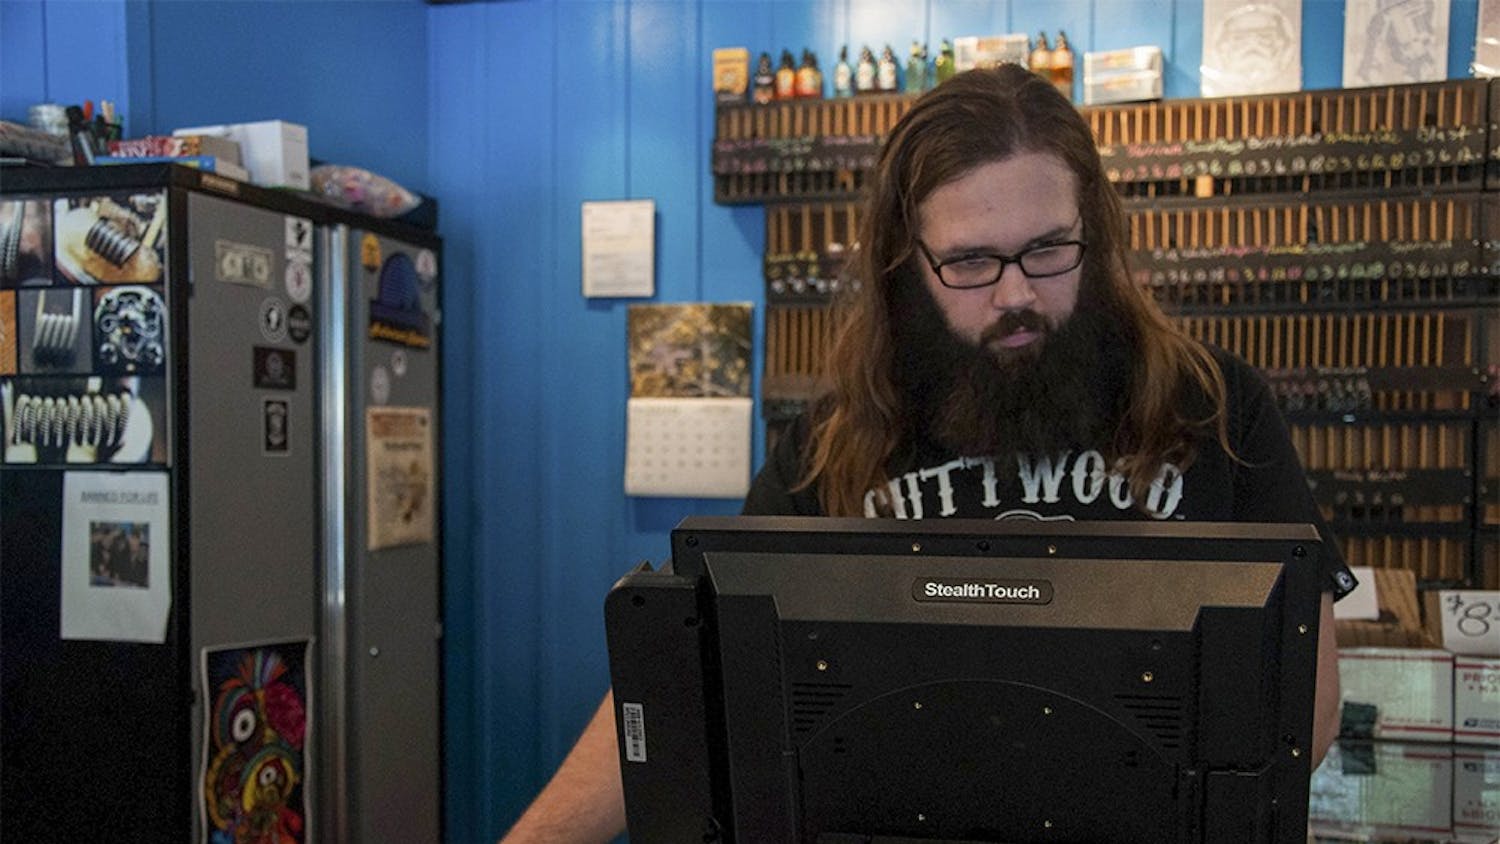 Justin Meier, the manager of the Indy E-cigs, works in his shop on Wednesday at the Indy E-cigs. Indy E-cigs is a vapor shop. 